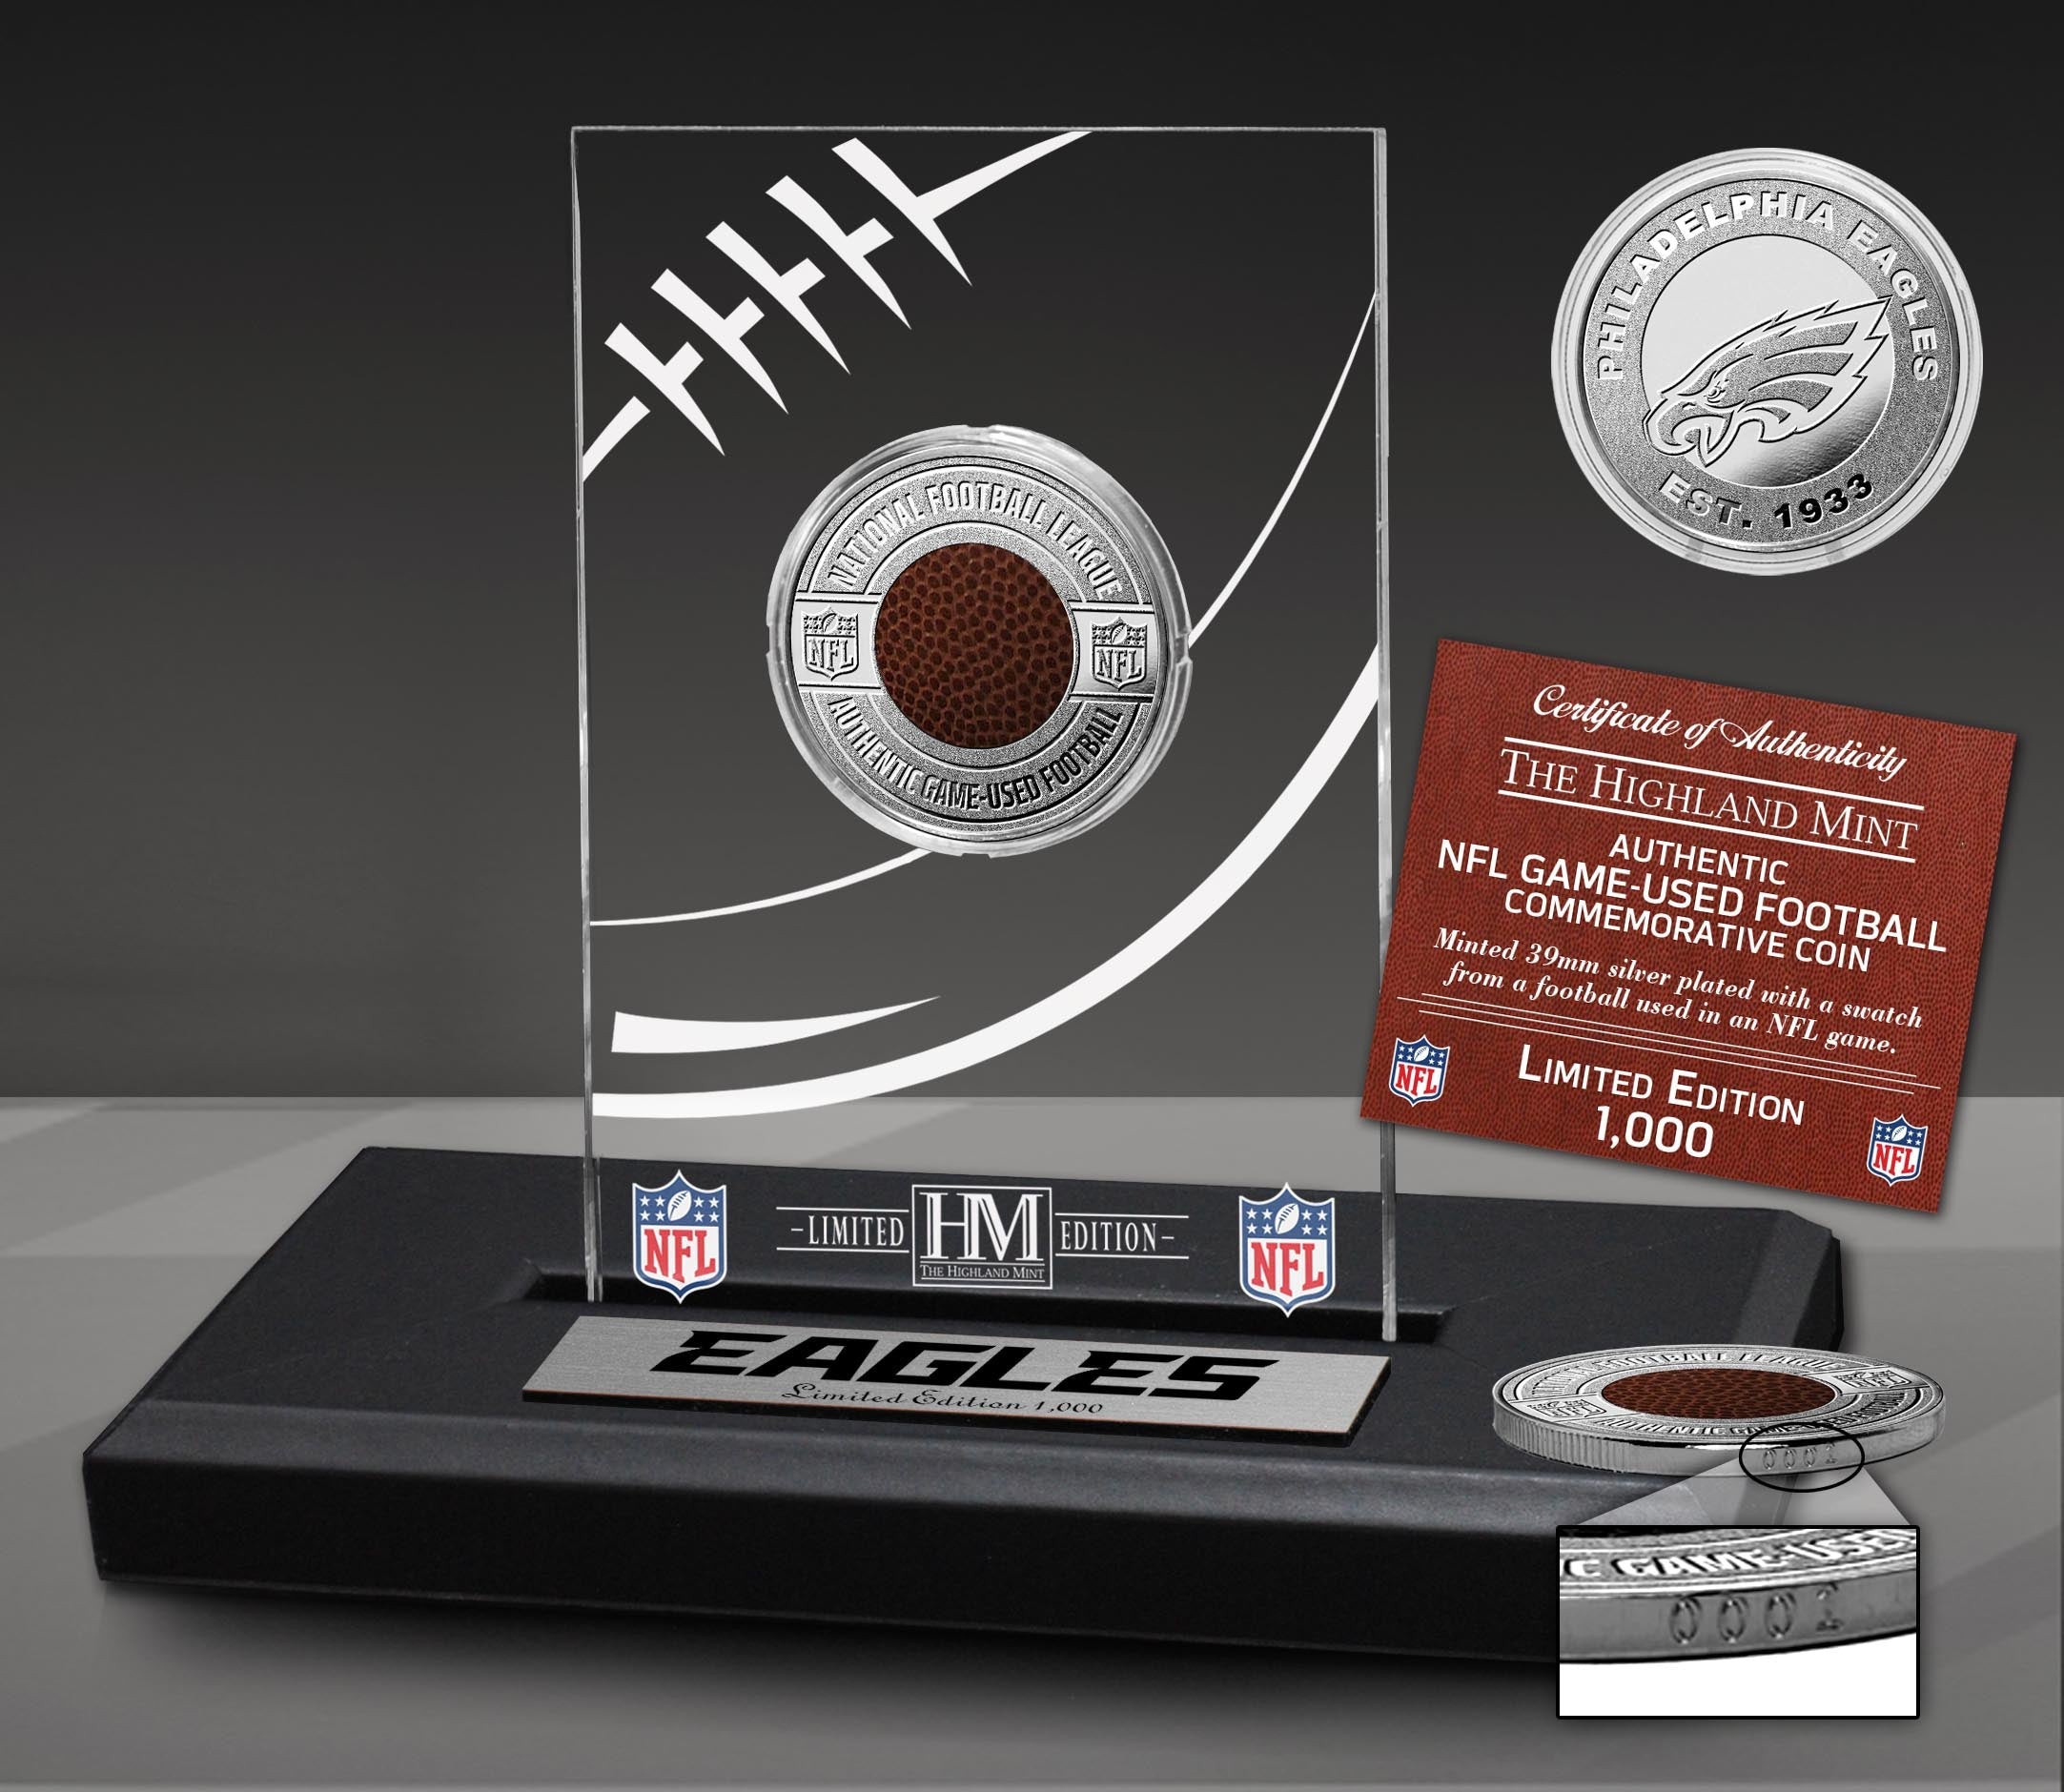 Philadelphia Eagles Game Used NFL Football Silver Plated Coin in Commemorative Display